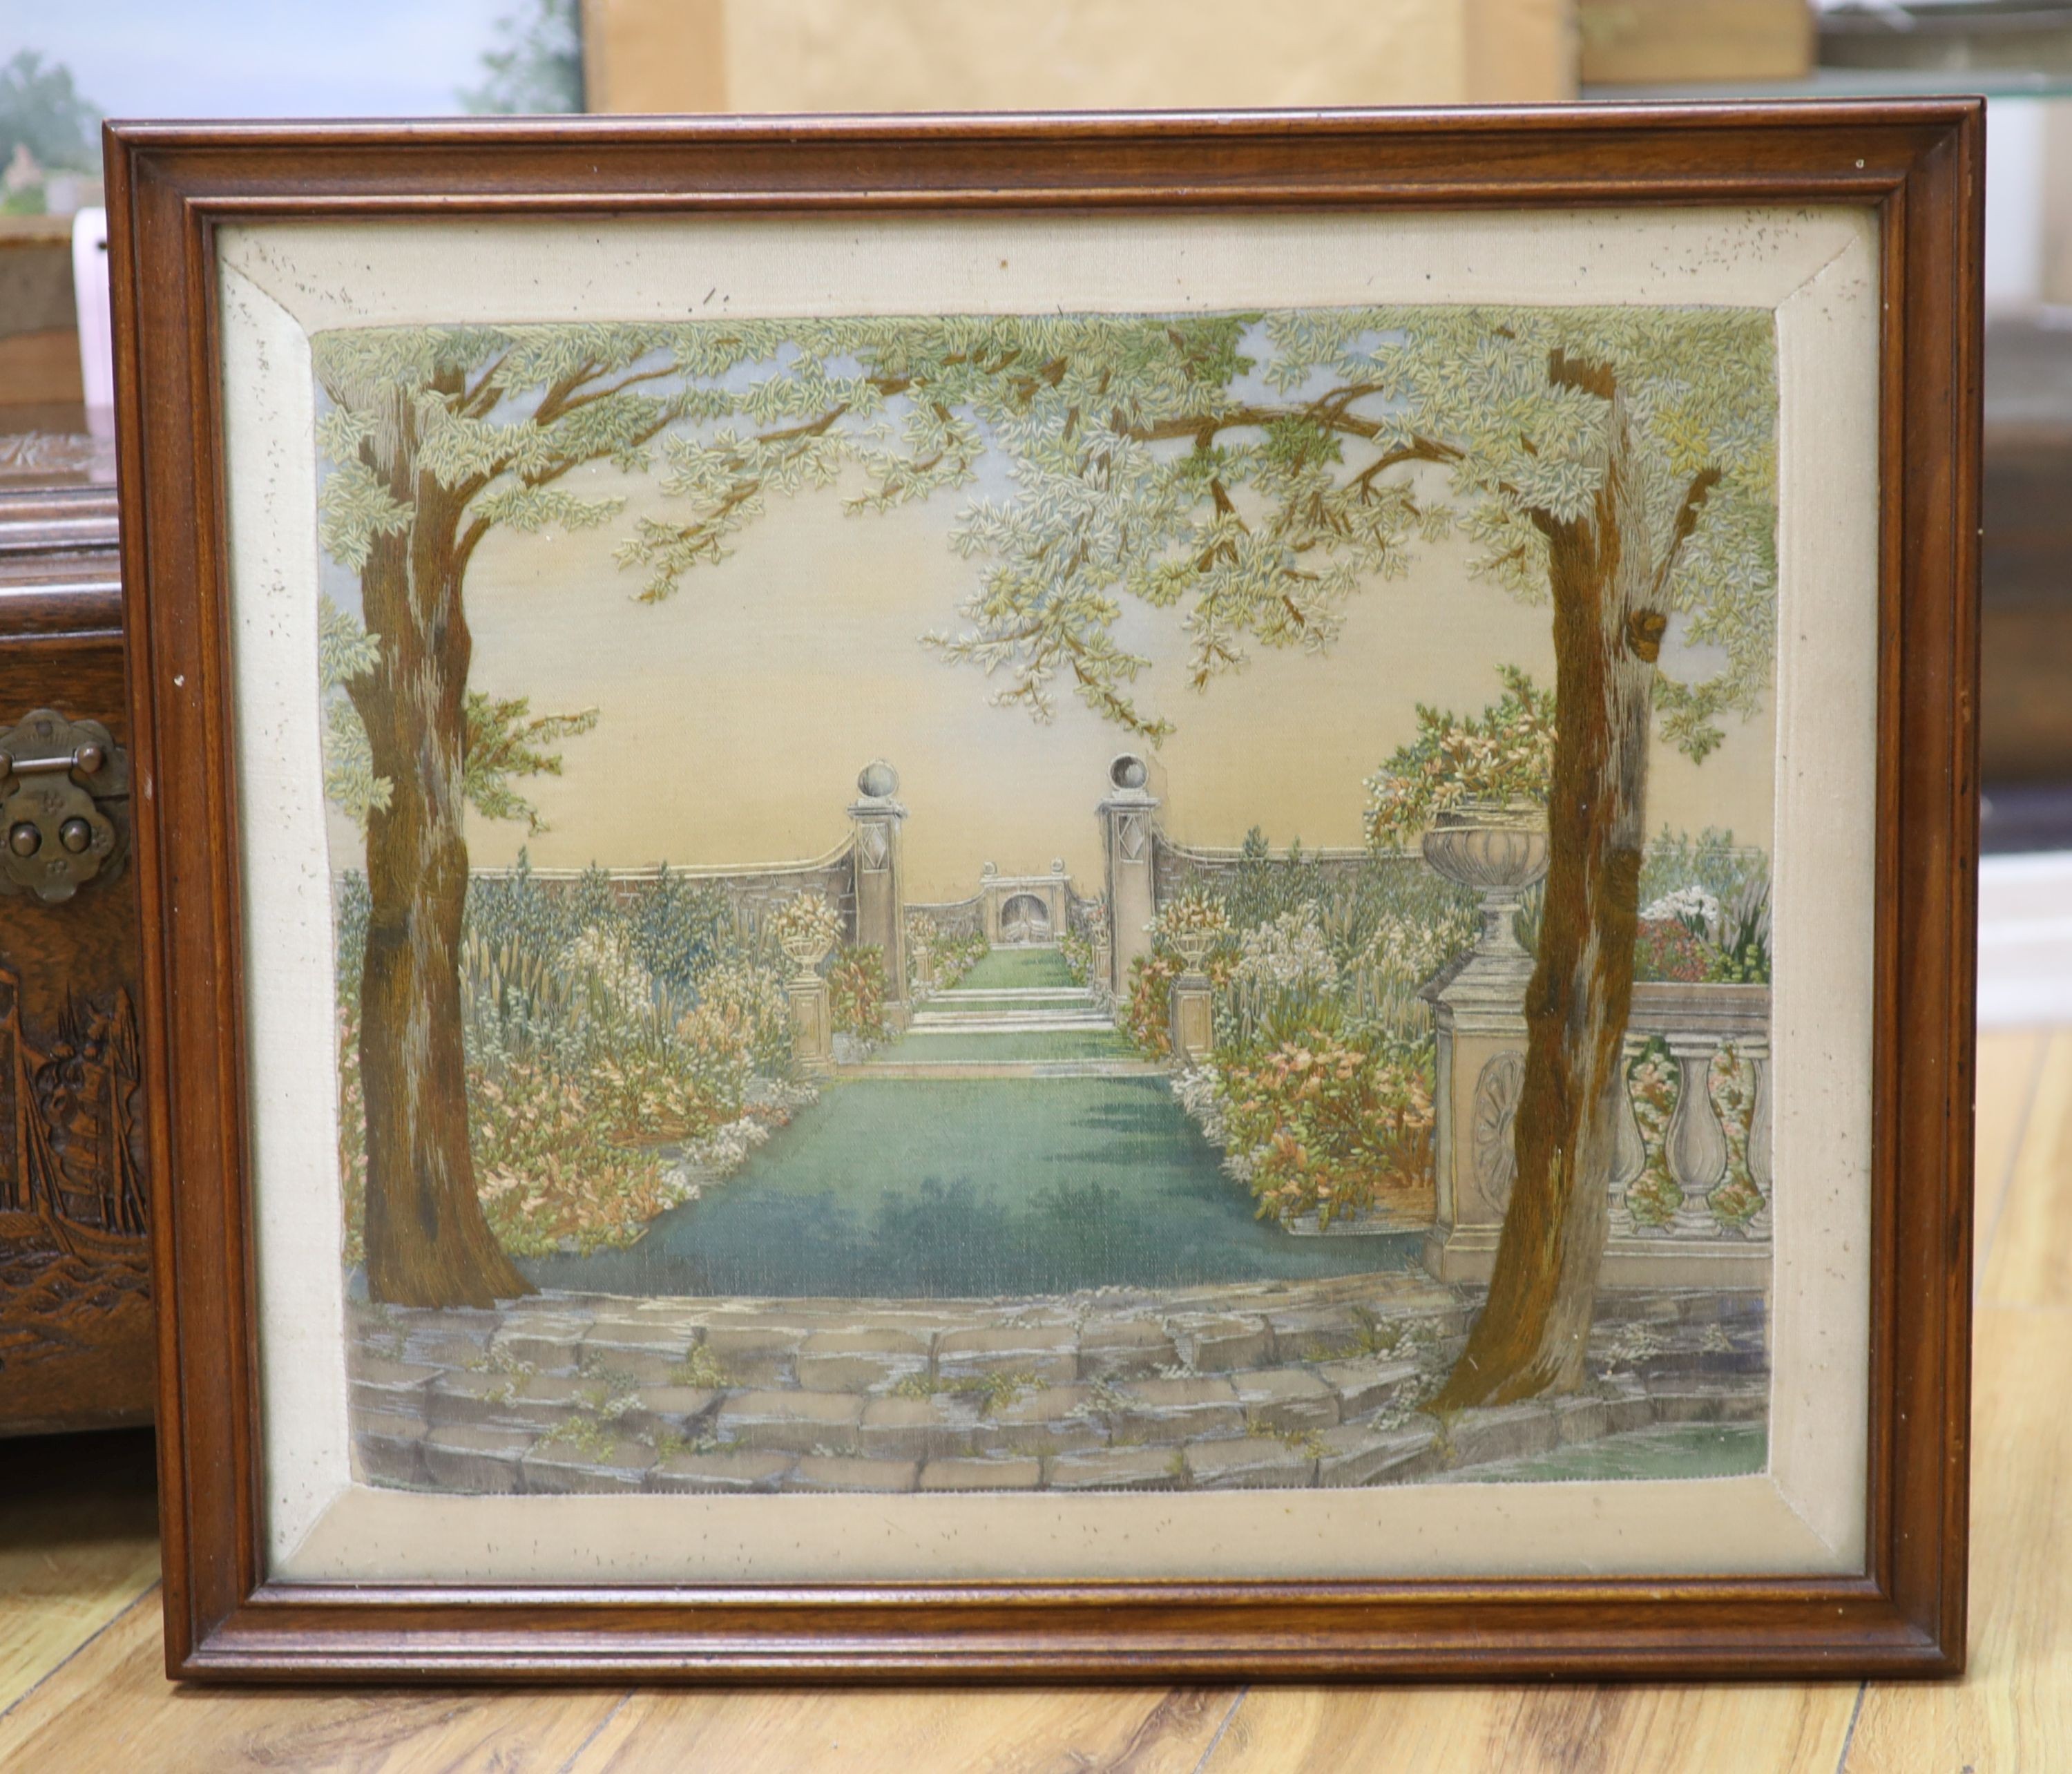 A 1920's-30's embroidered picture of a classical garden